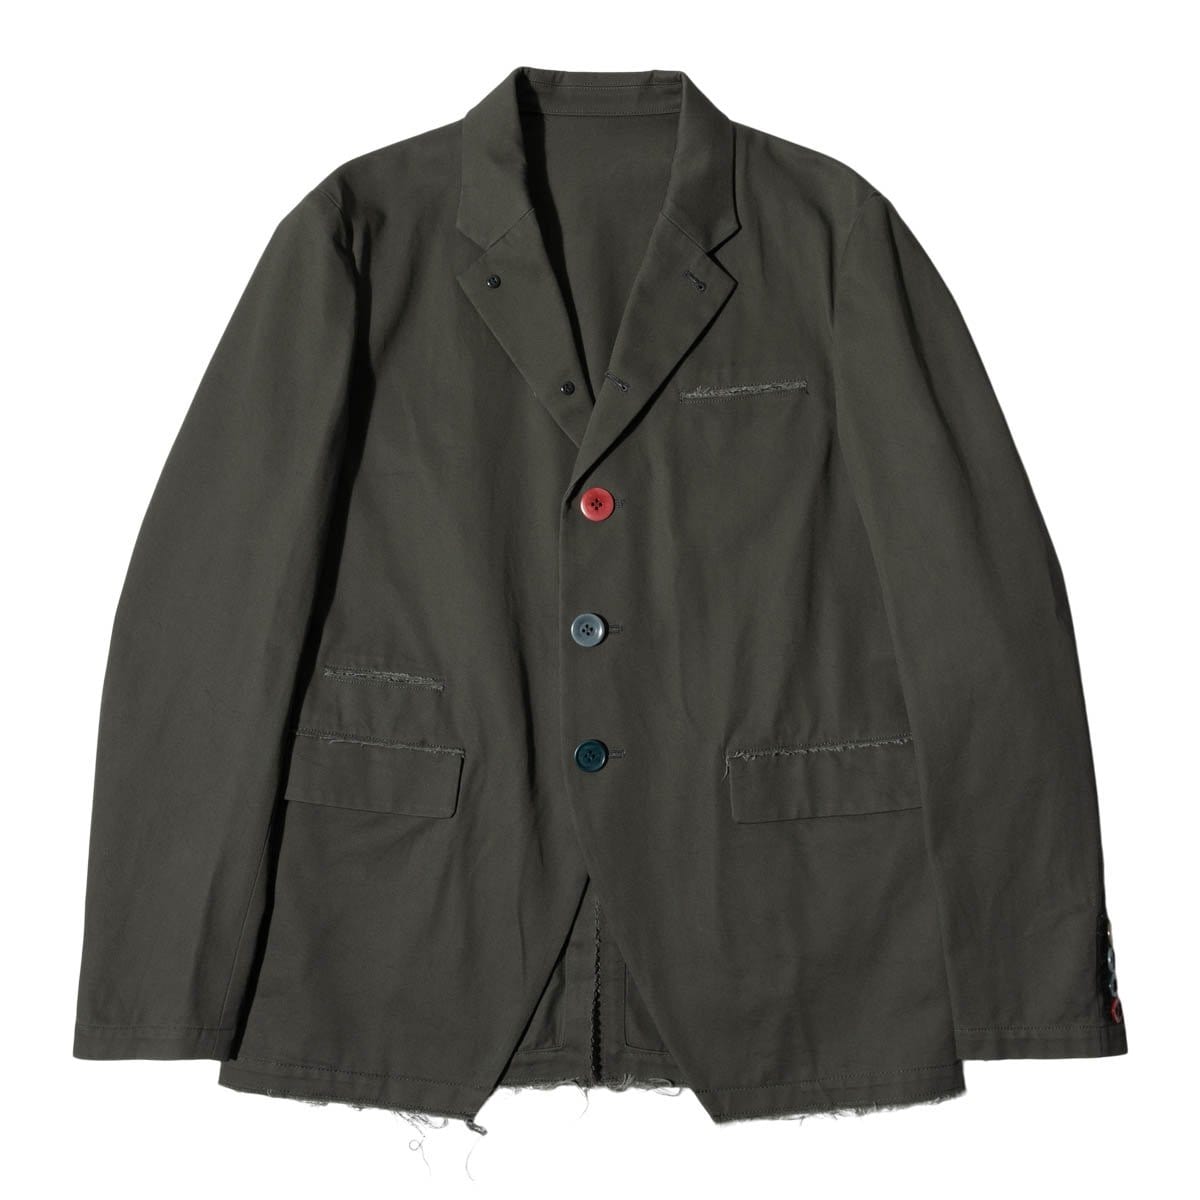 Undercover Outerwear UC1A4104-2 JACKET